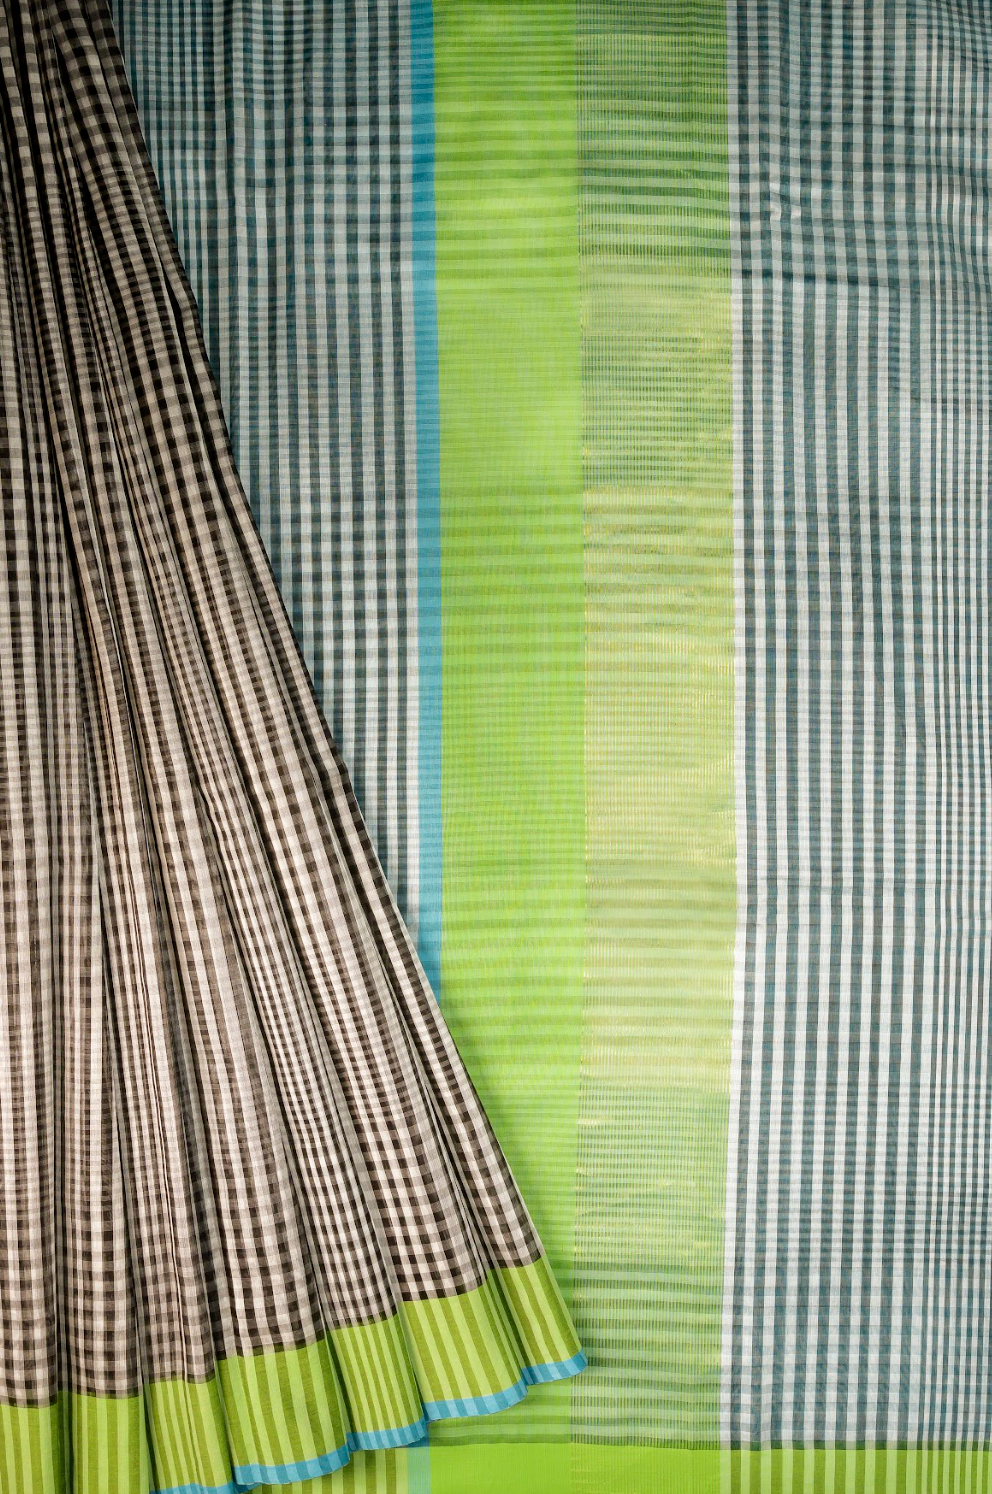 NEW - Black and White Checks with Green Borders